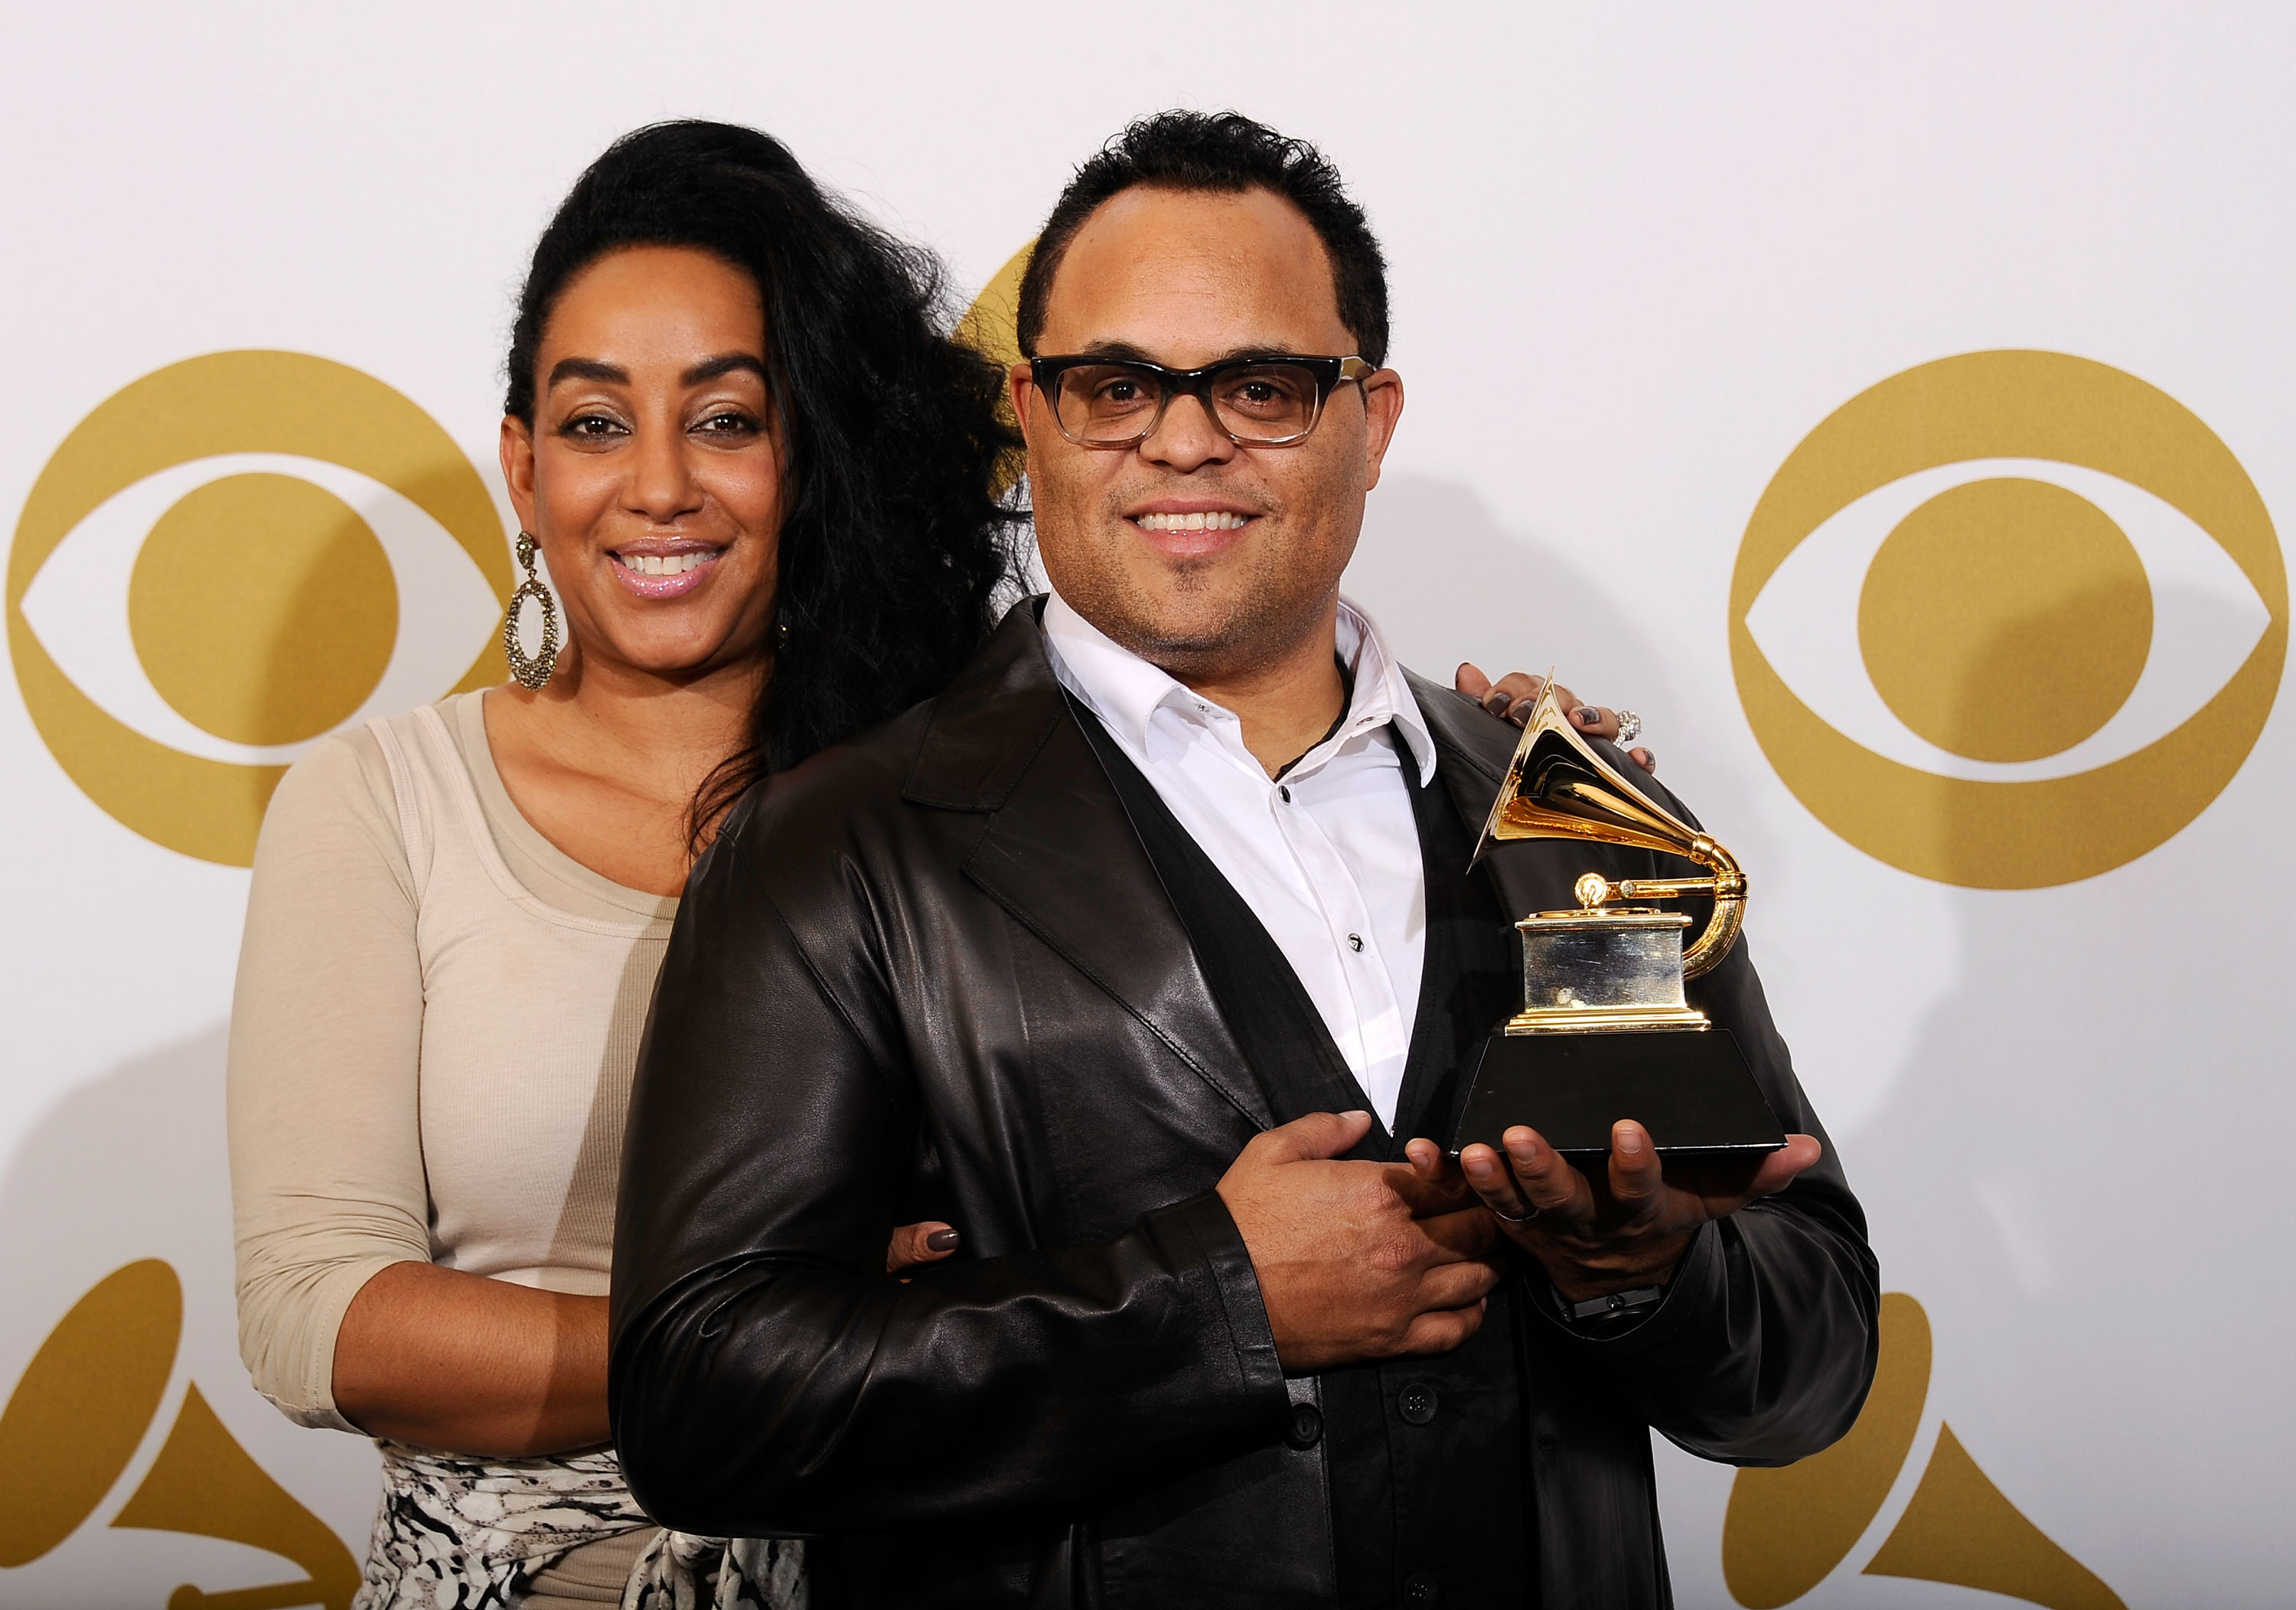 Meleasa and Israel Houghton pose in the press room at The 53rd Annual GRAMMY Awards held at Staples Center on February 13, 2011, in Los Angeles, California. | Source: Getty Images